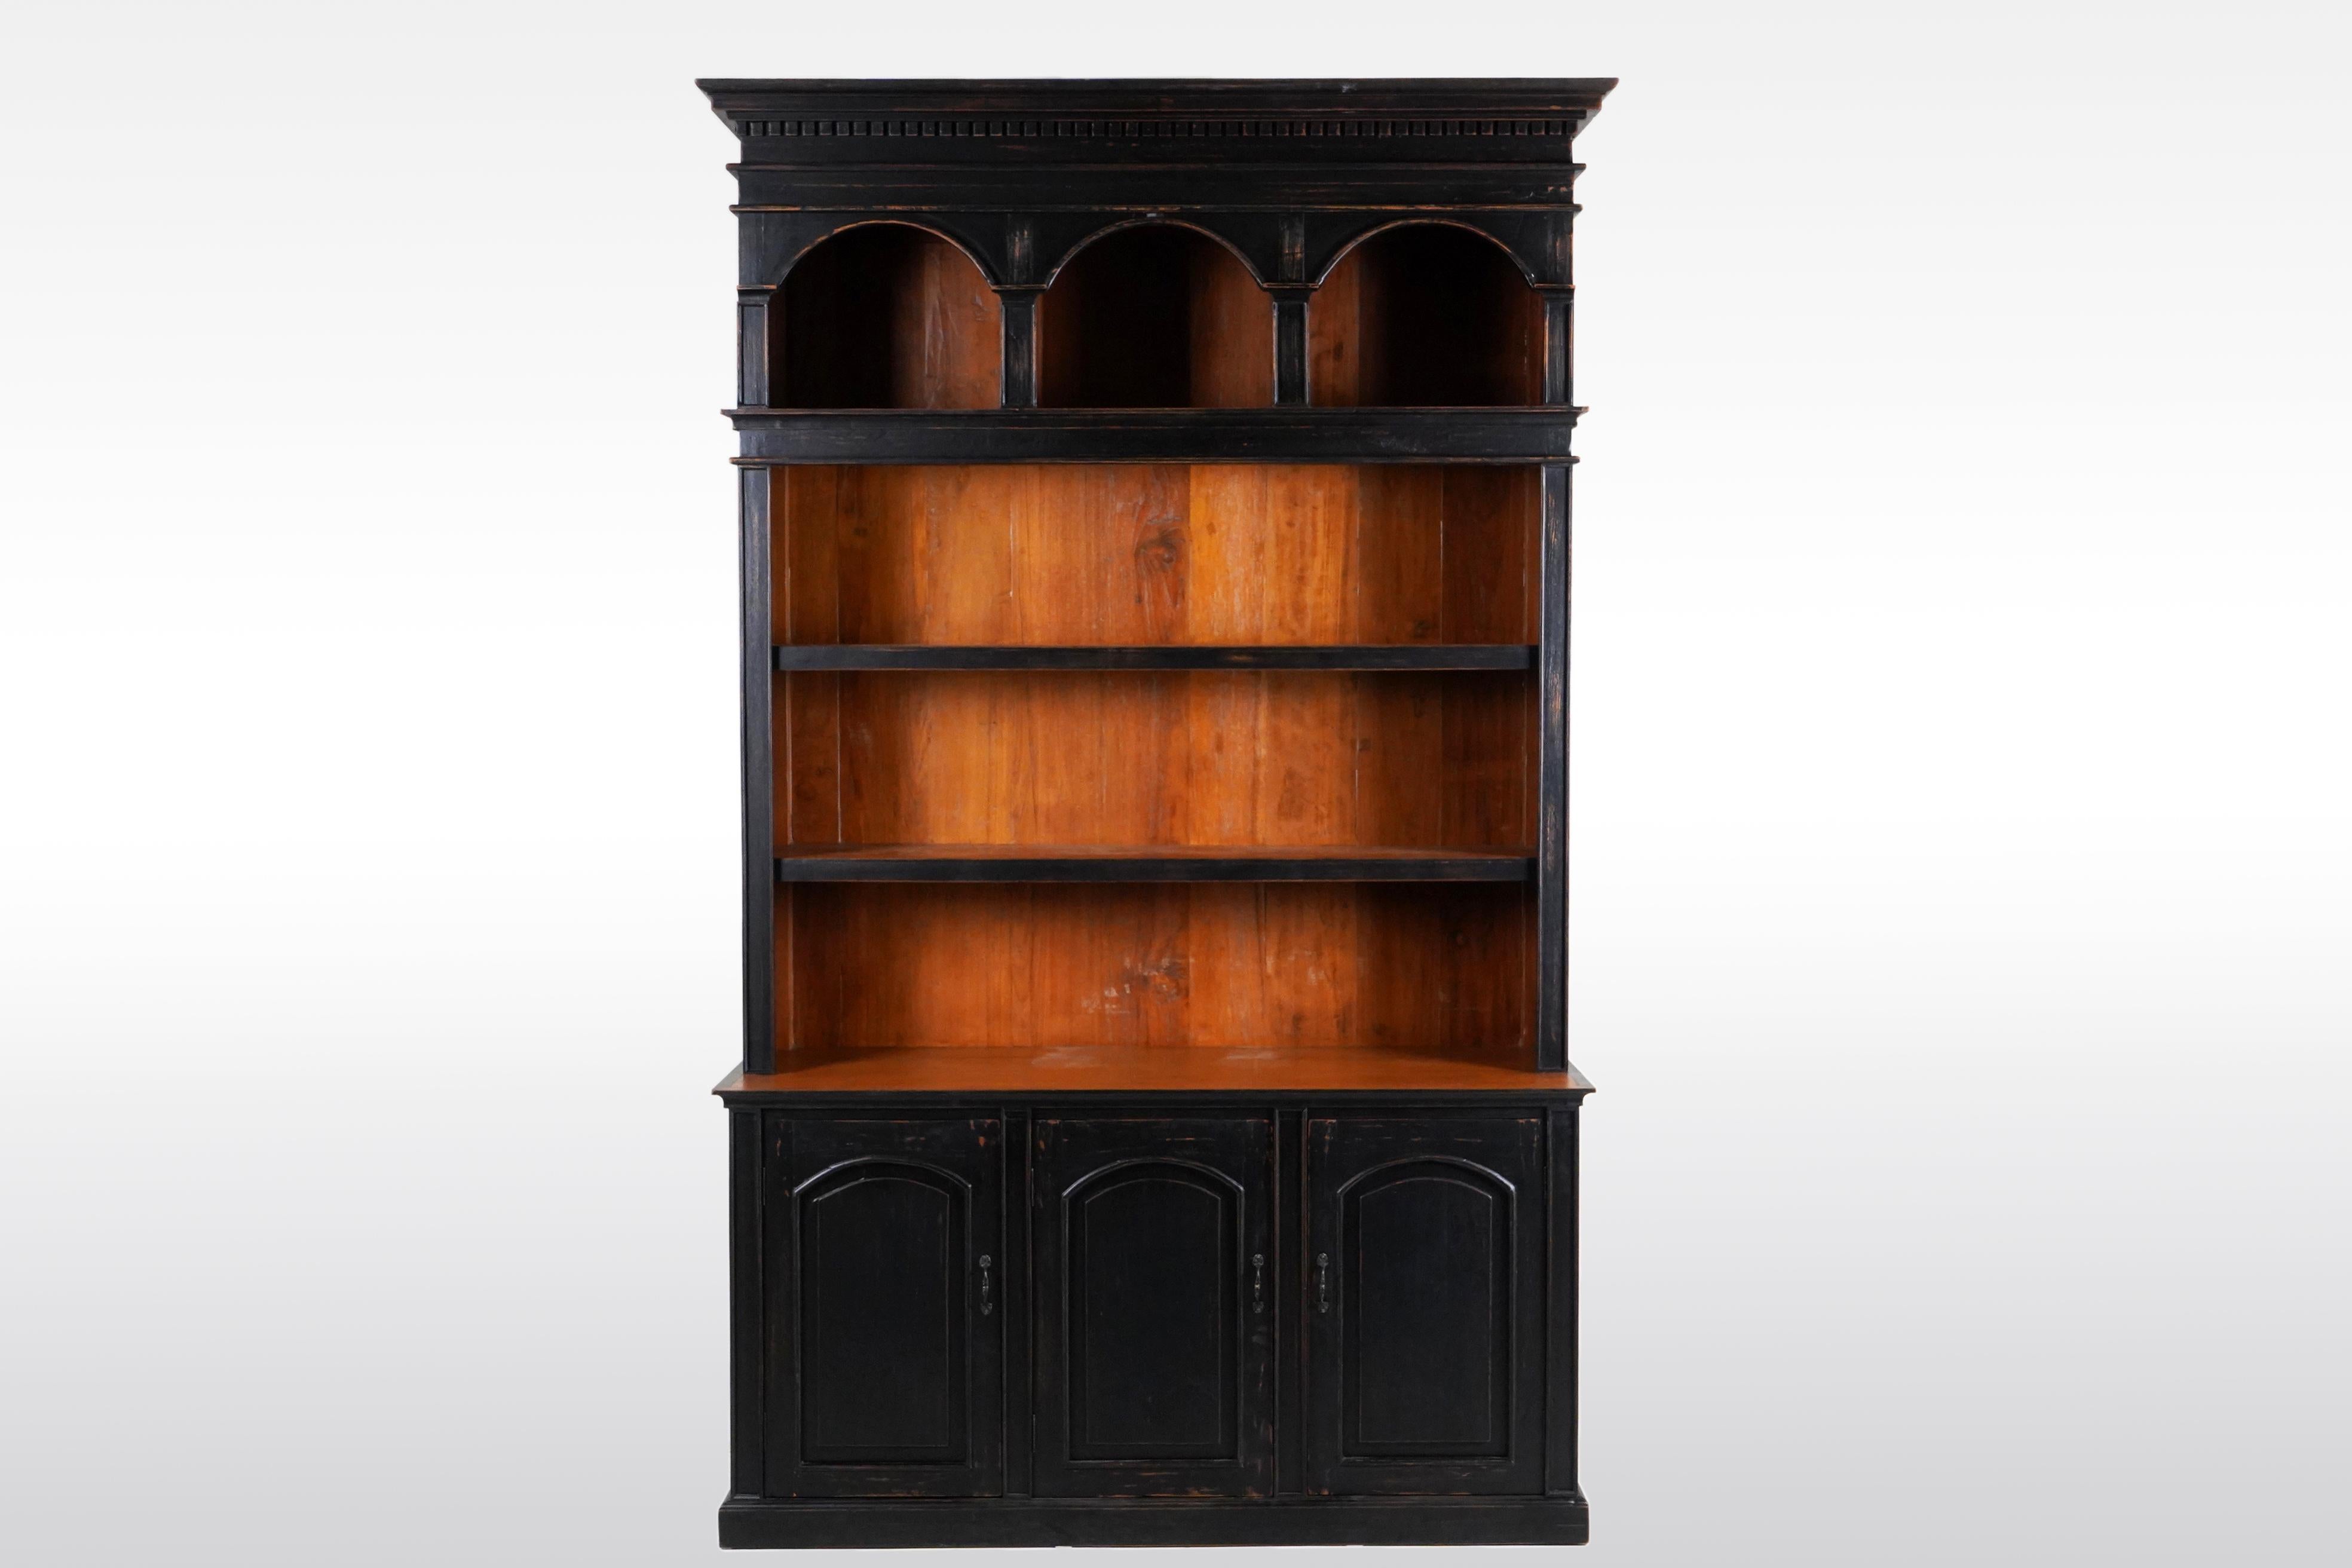 This open large antique book cabinet was made from solid teak wood and dates to the 19th Century. During the British Empire in India and Burma much furniture was made in the Anglo-Indian style using native hardwoods and native craftsmen. Styles